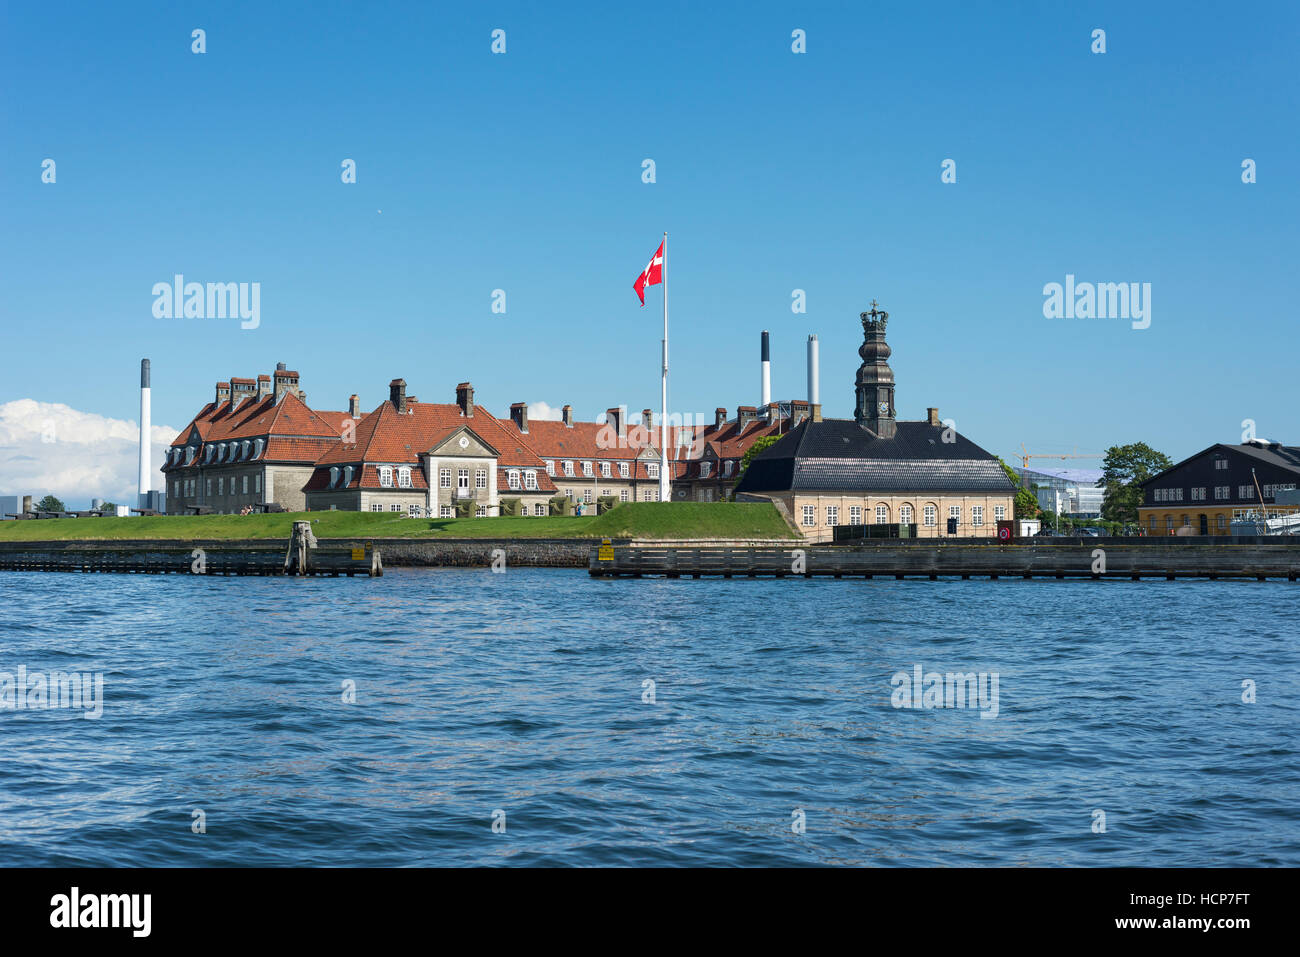 Military Open Air Museum, Holmen Naval Base, Central Station with tower, Nyholm Island, Inner Harbor, Copenhagen, Denmark Stock Photo